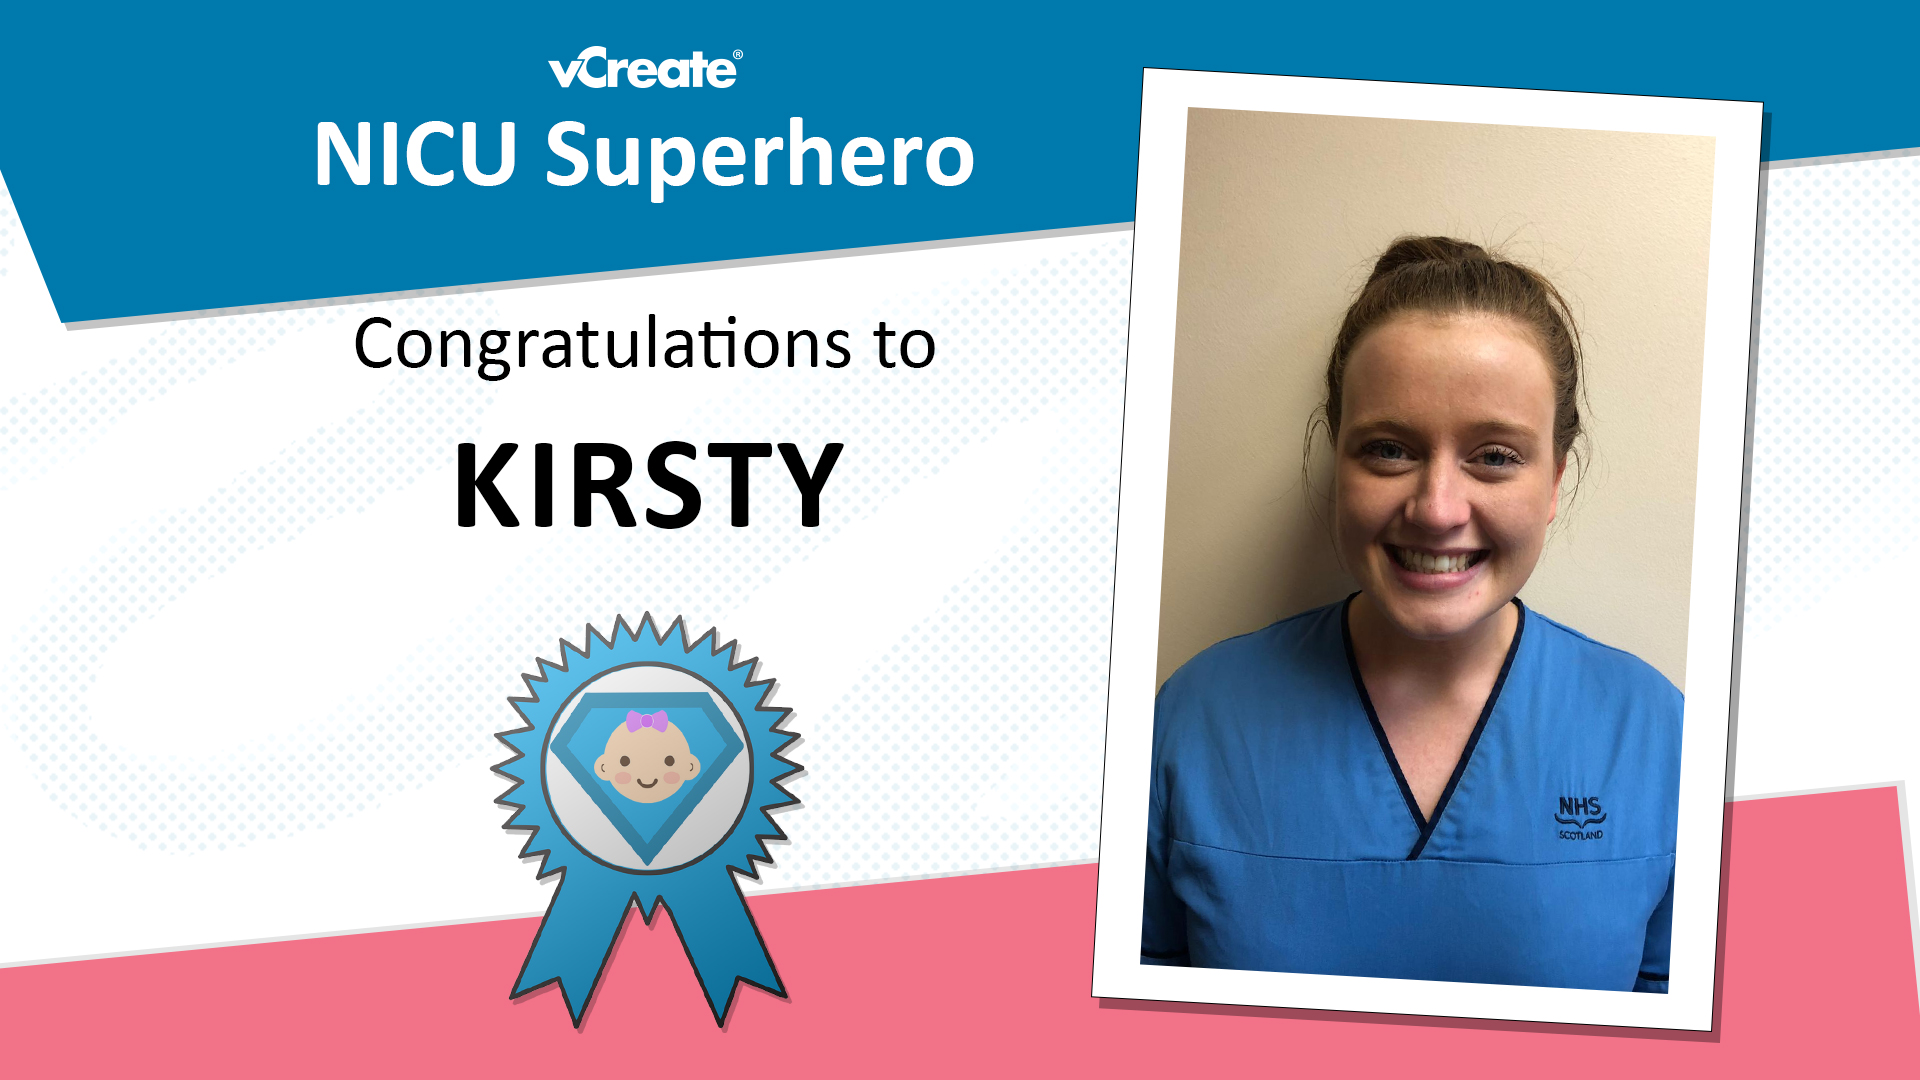 Kirsty from Aberdeen Maternity Hospital is crowned NICU Superhero!  